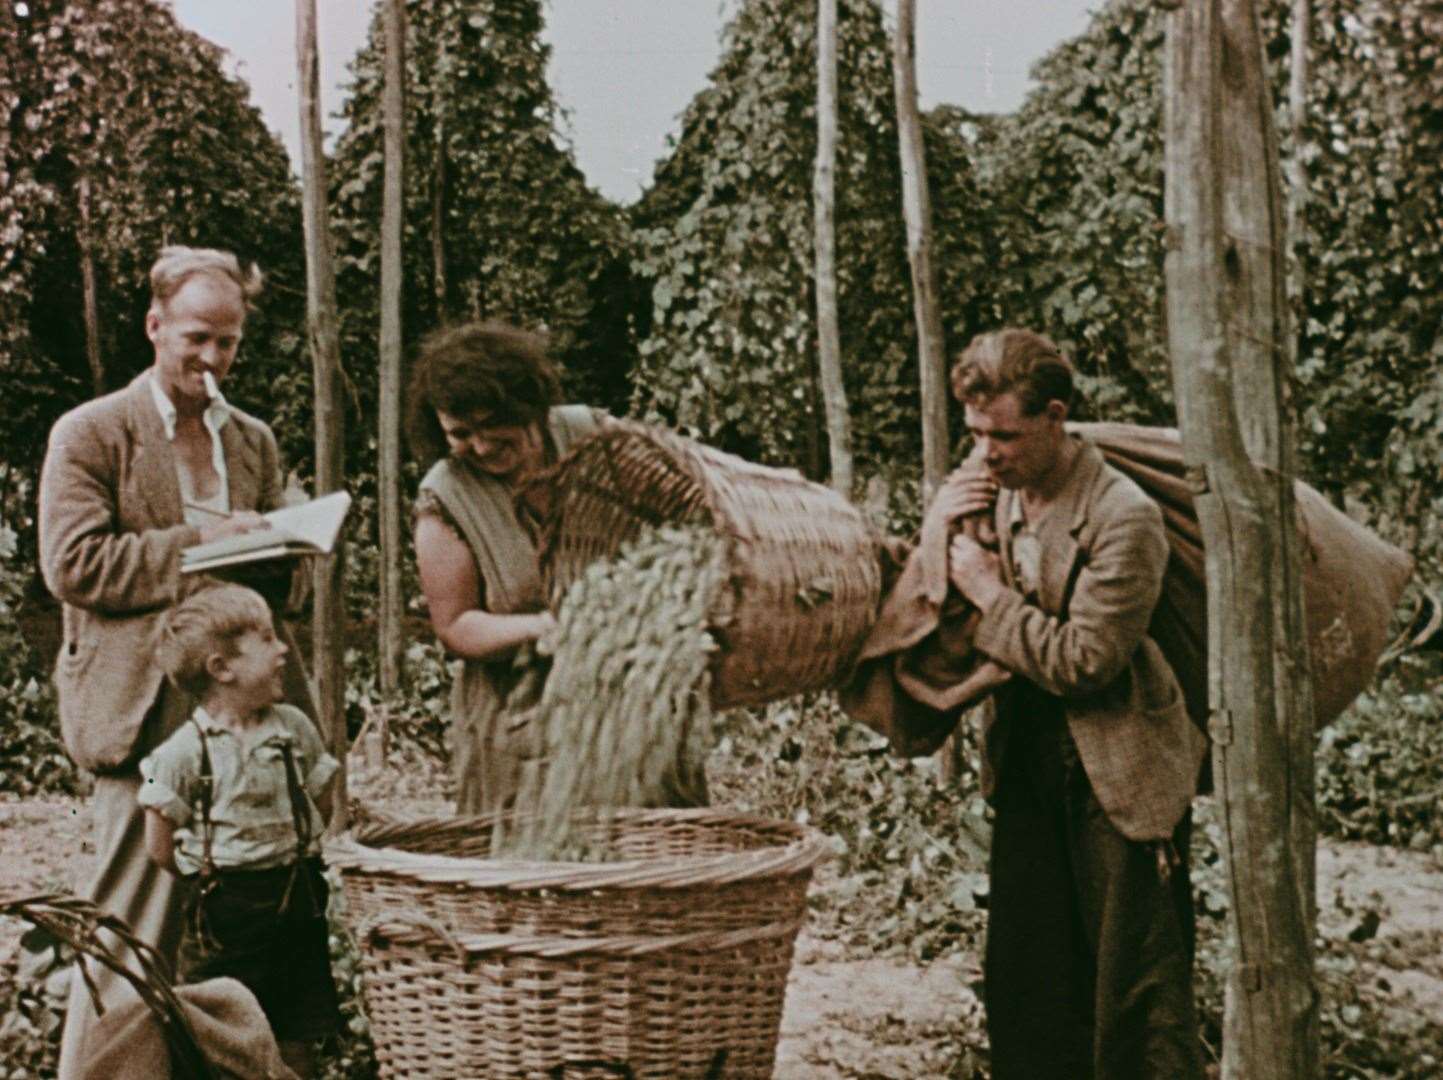 Stills of an early colour film of hop farming, taken on September 6, 1937. Picture: ‘Hop Picking at Mr Whiteman's Garden Tyler Hill, Canterbury’. Sydney Bligh (Screen Archive South East at the University of Brighton) with thanks to Tim Jones, Canterbury Christ Church University